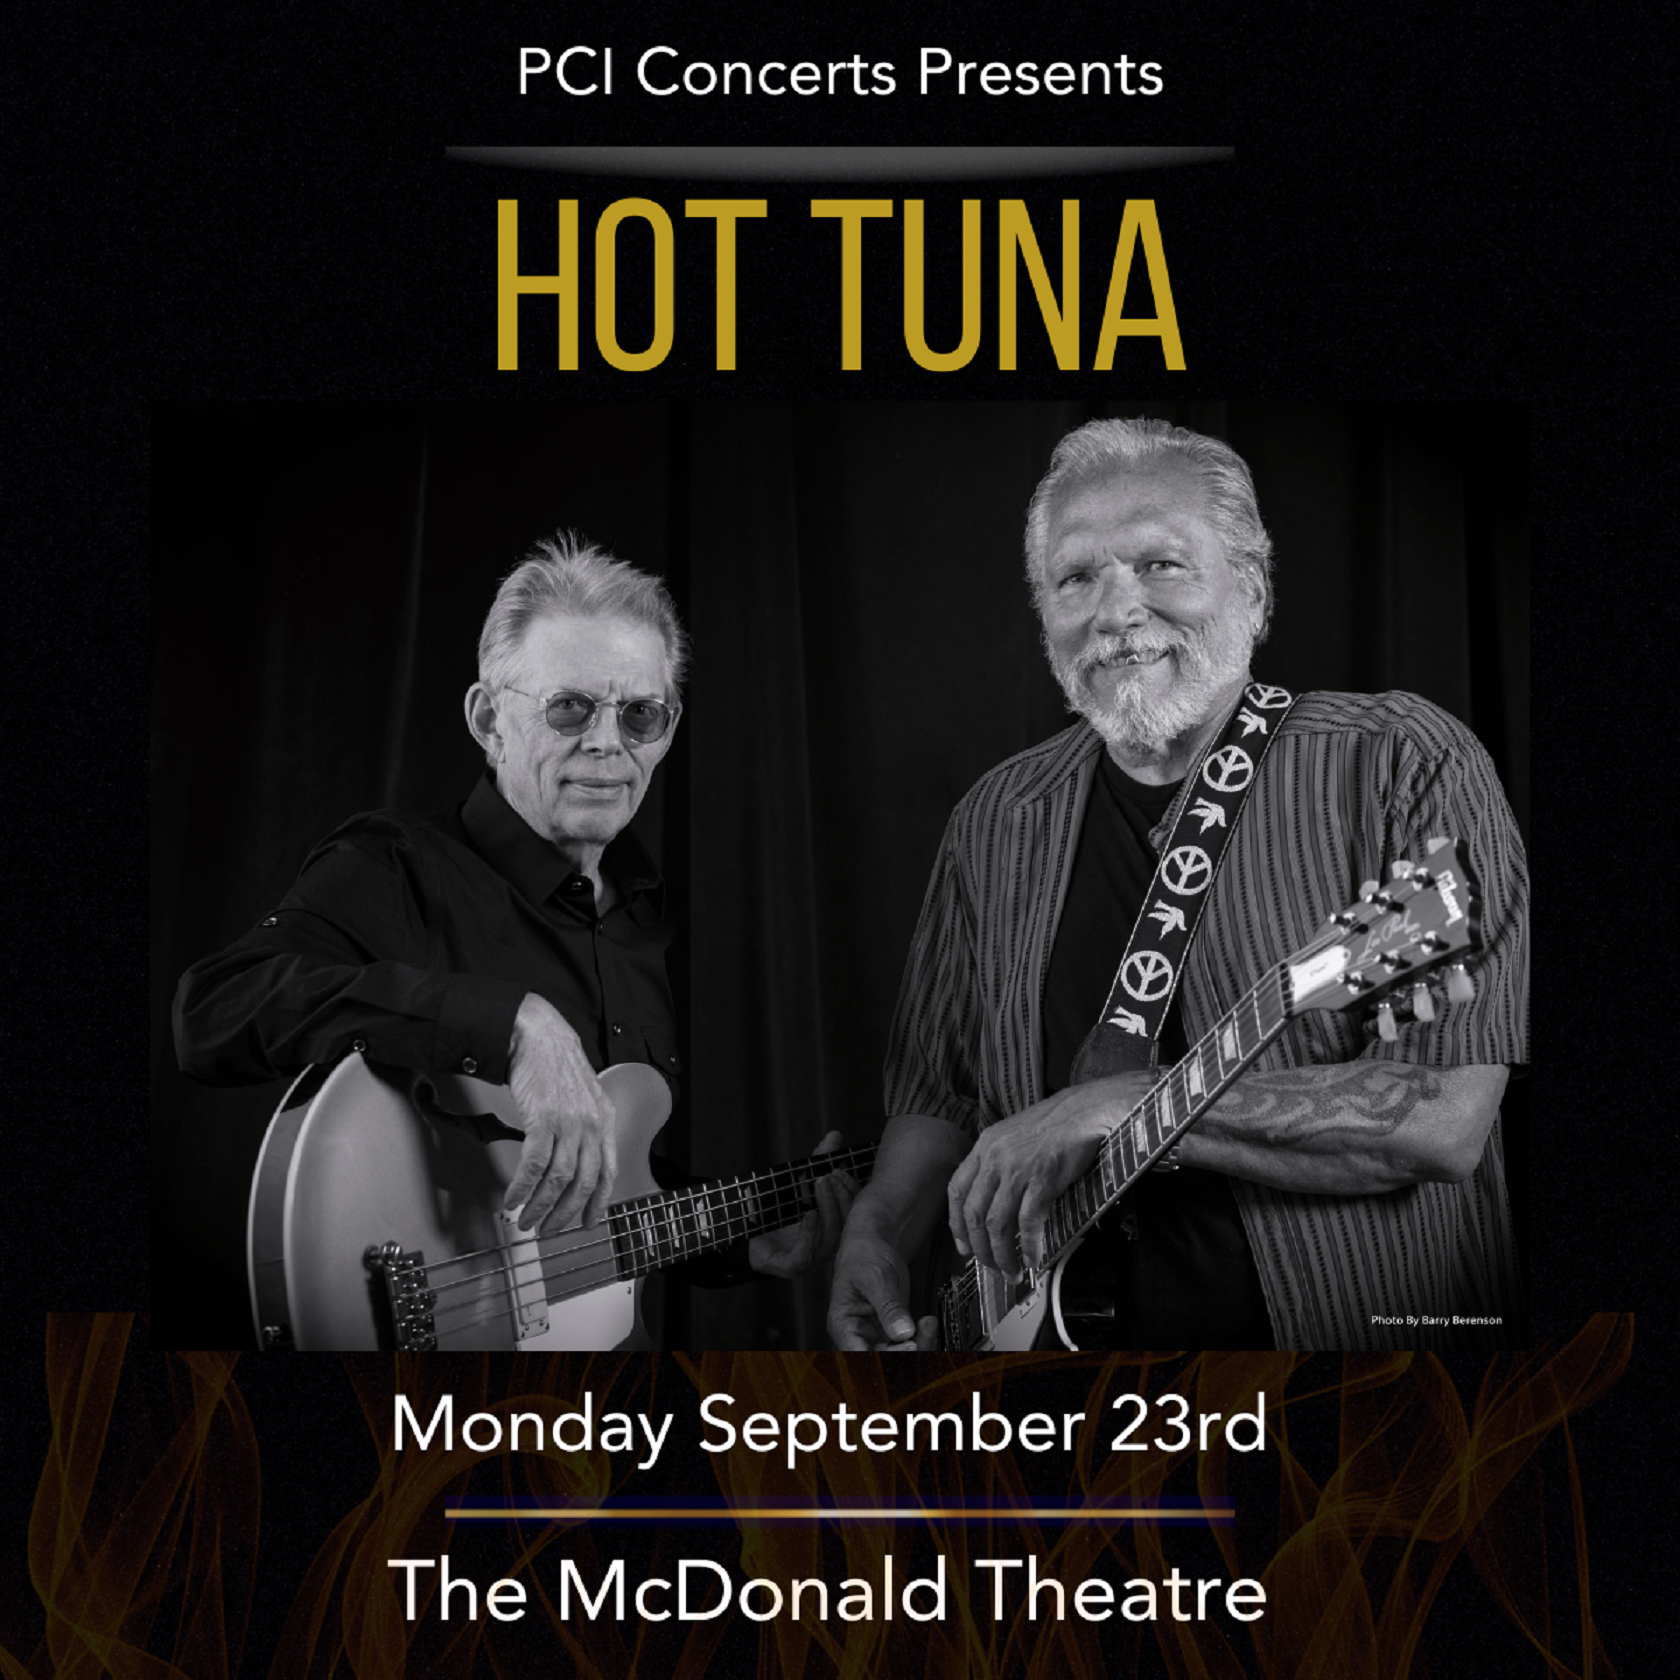 An Evening with Hot Tuna Acoustic at The McDonald Theatre - September 23rd